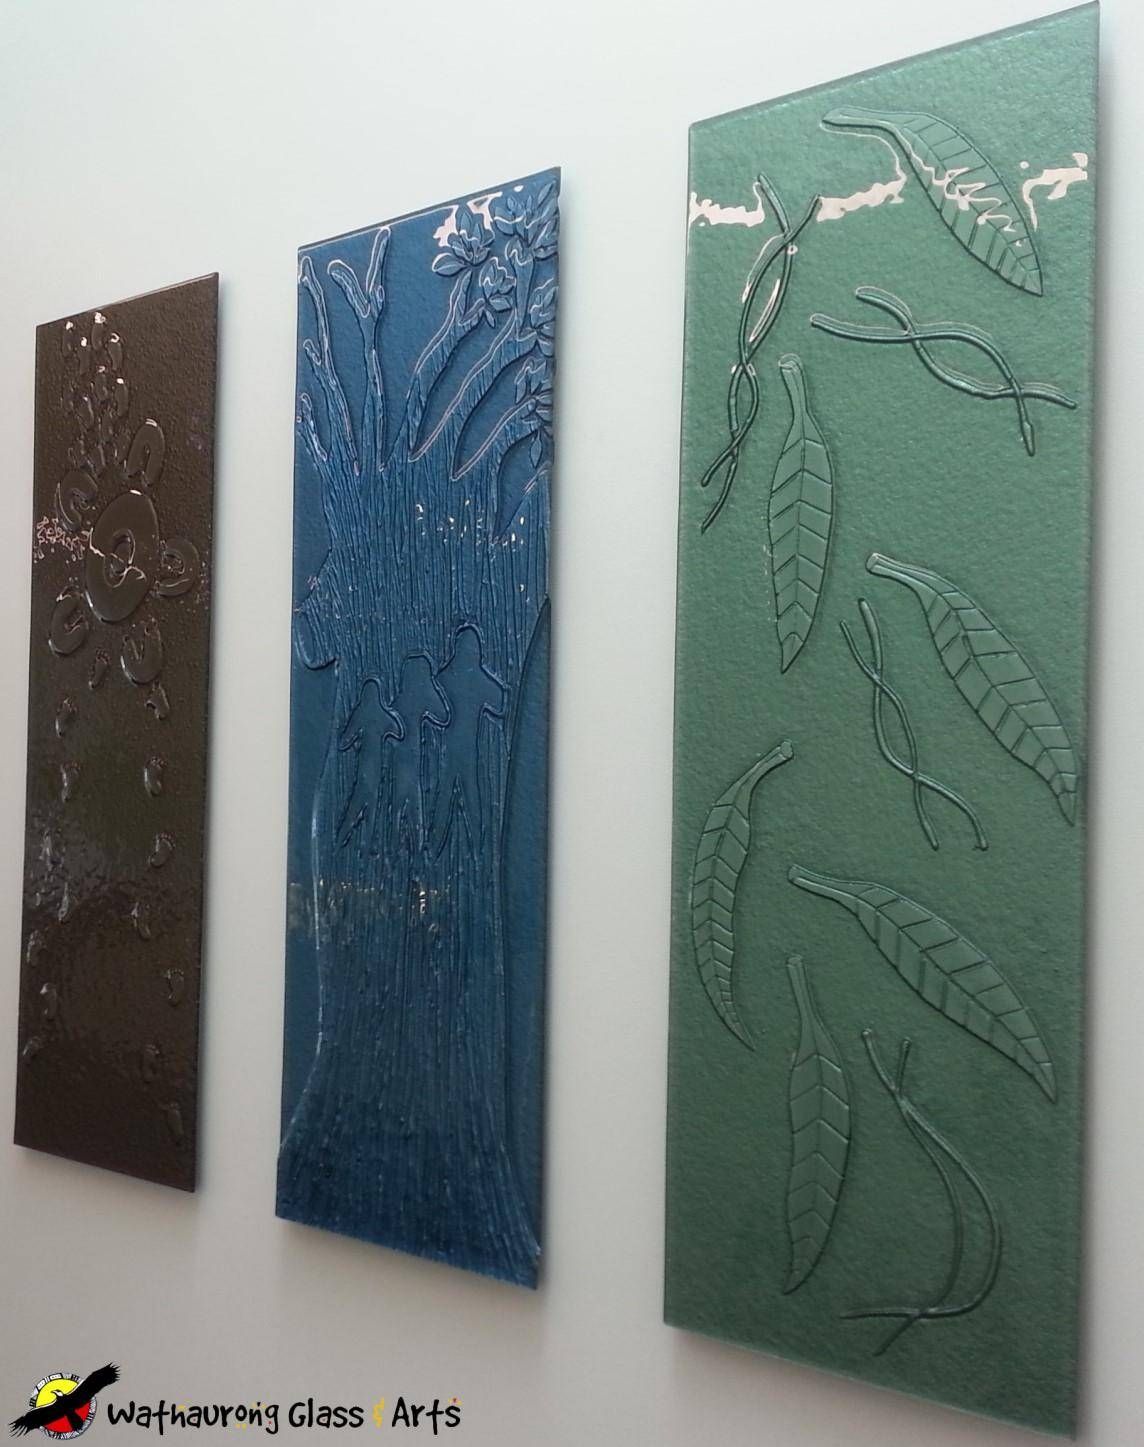 Internal Glass Wall Art – Wathaurong Glass With Regard To Most Up To Date Glass Wall Art Panels (Gallery 4 of 20)